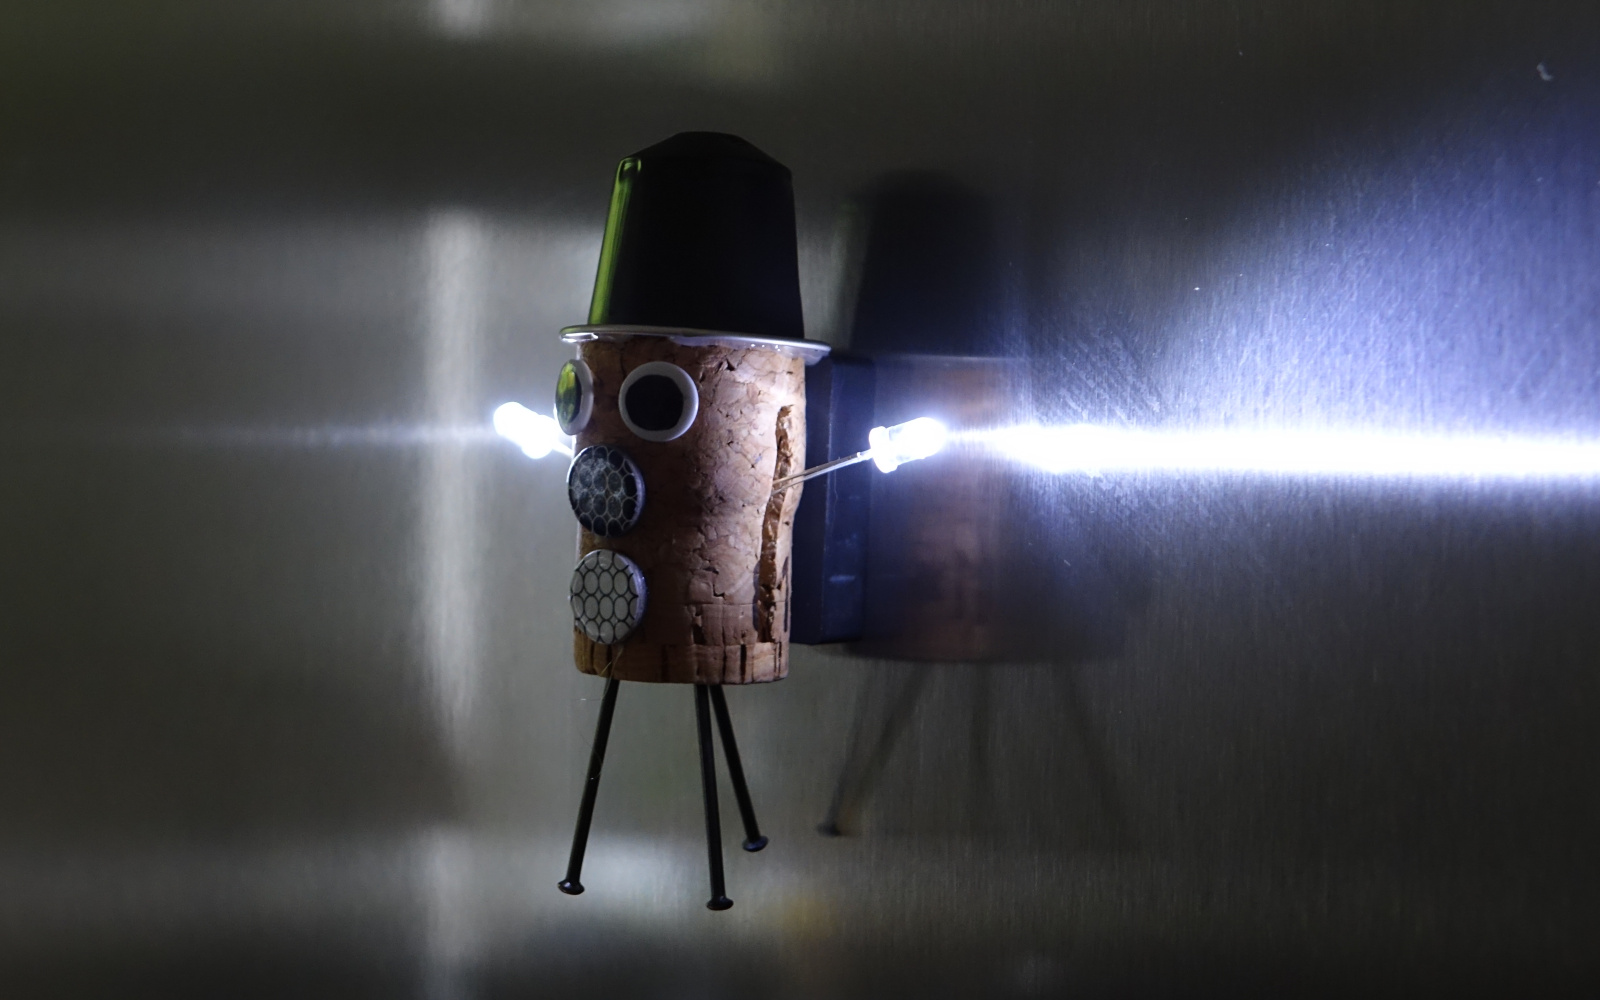 Fantasy figure with light is hanging on the fridge